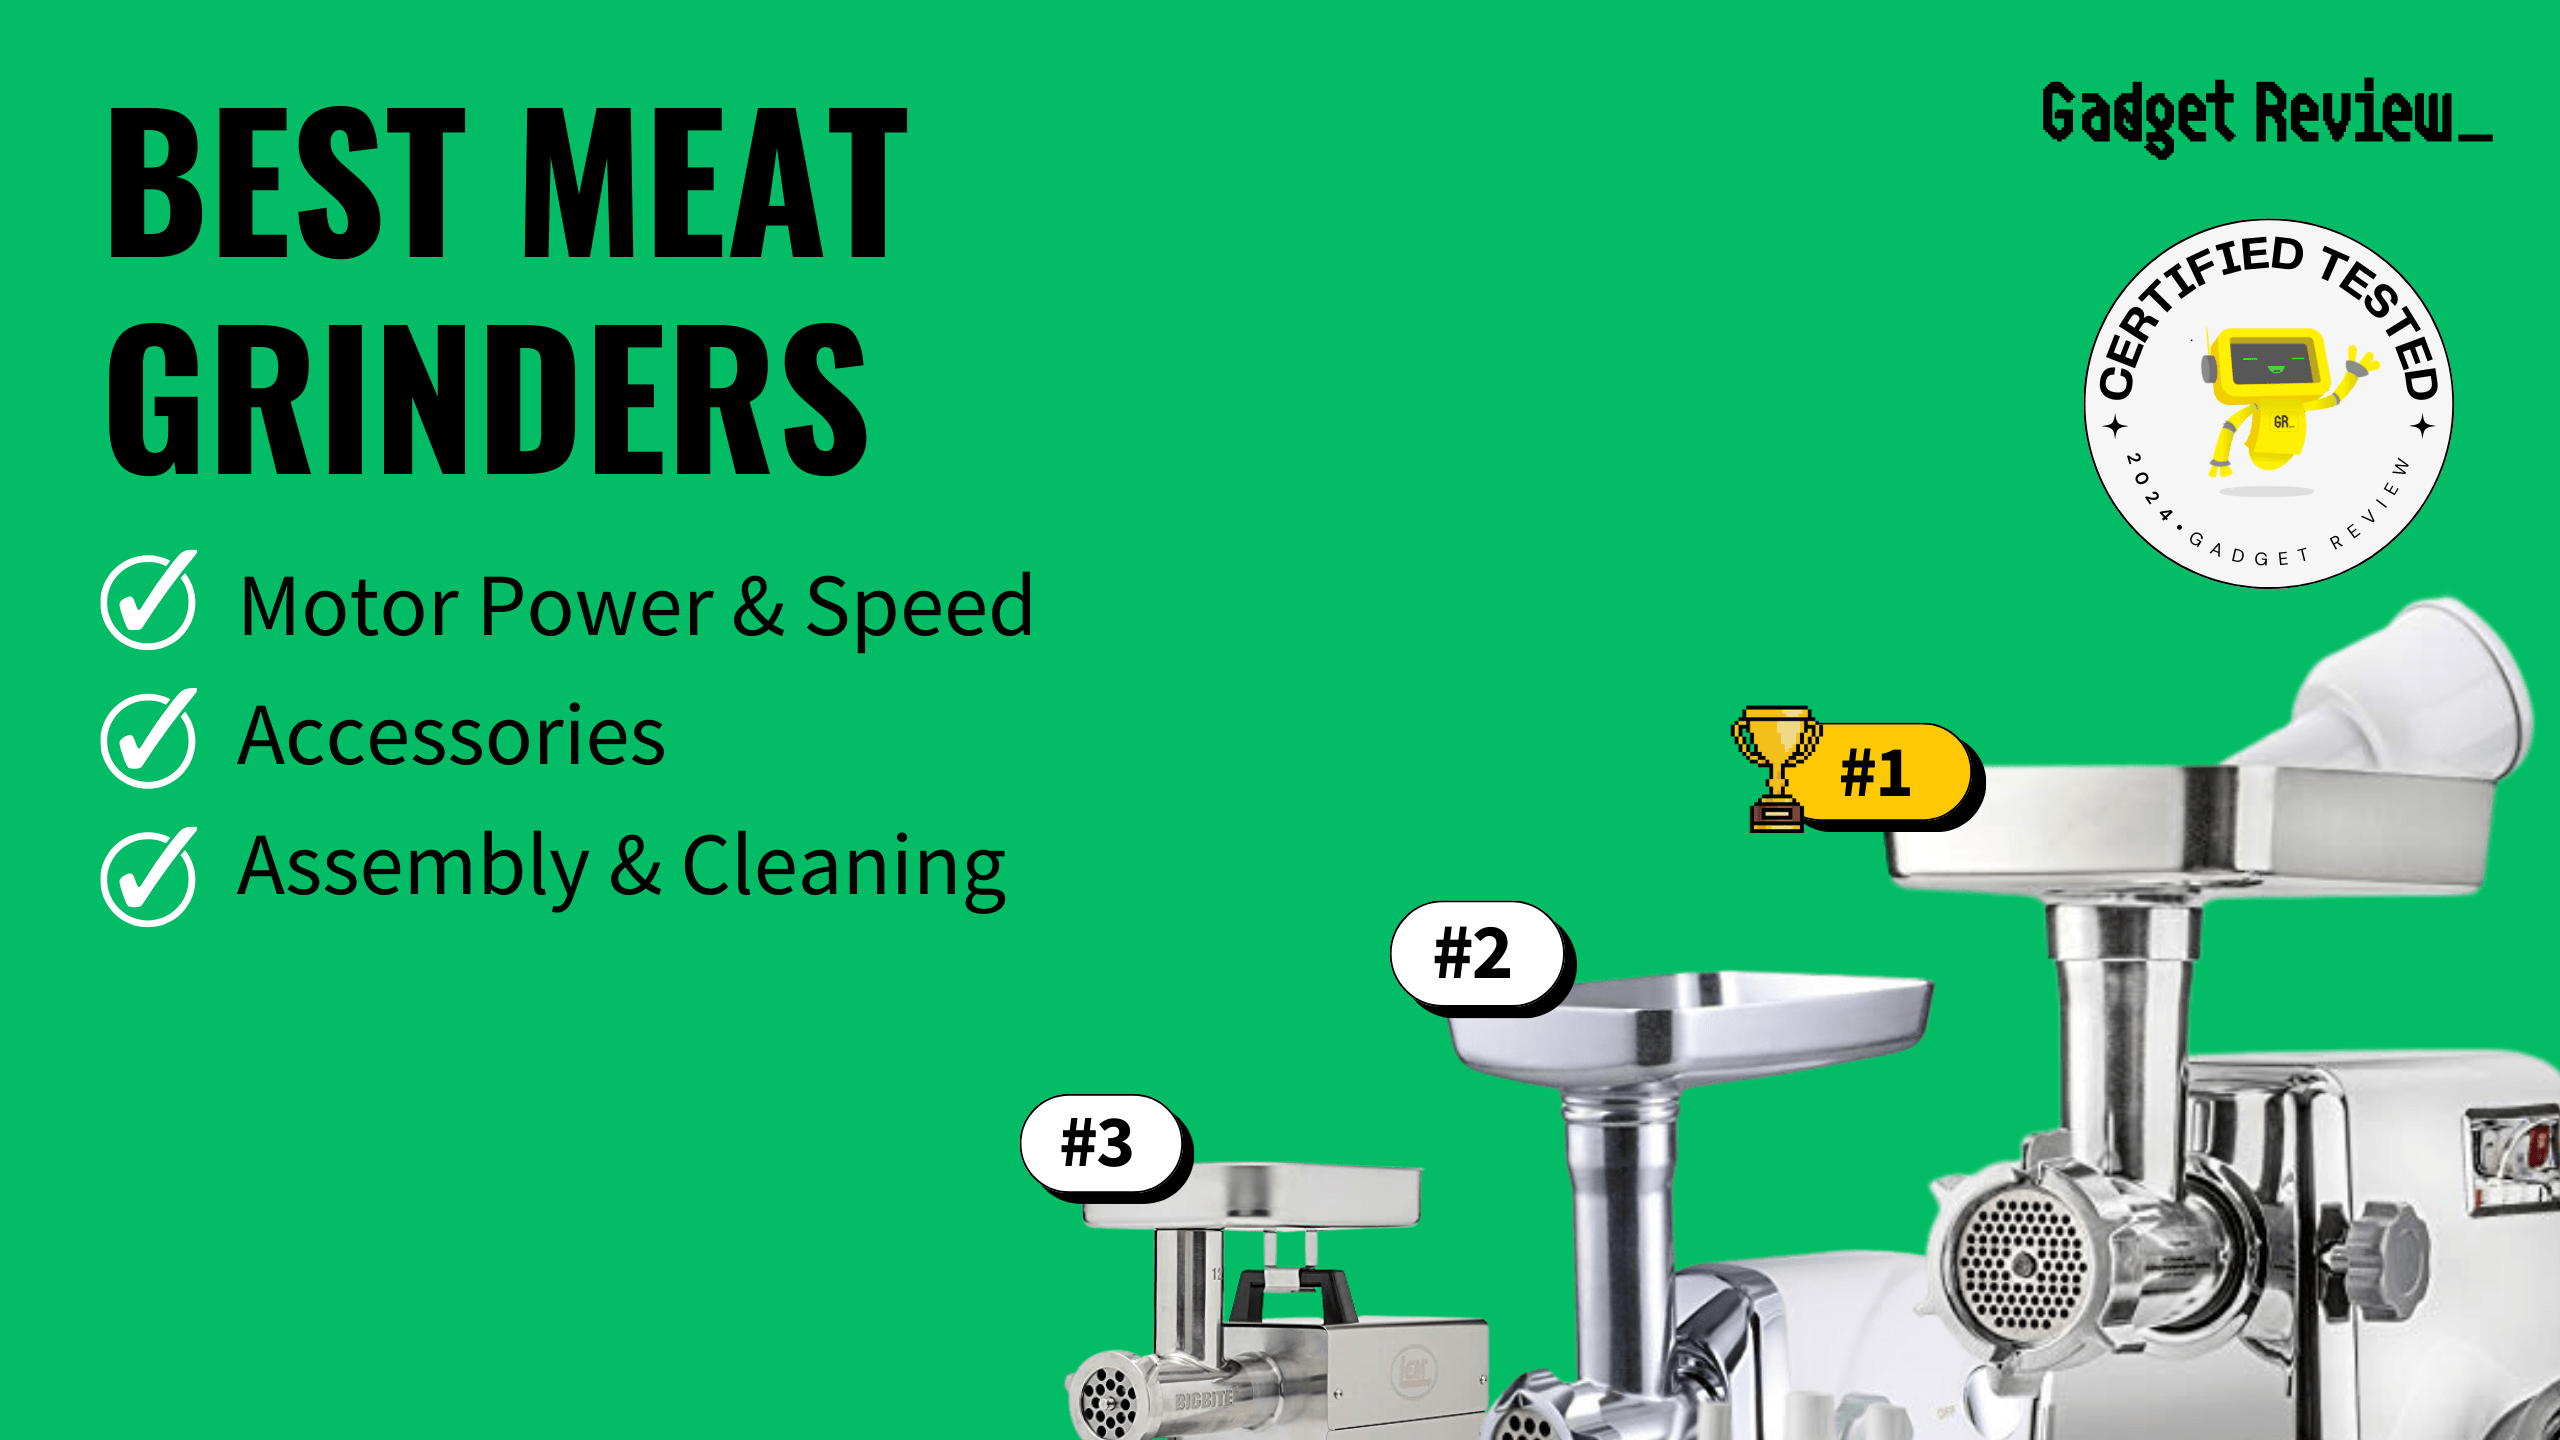 best meat grinders guide that shows the top best kitchen product model